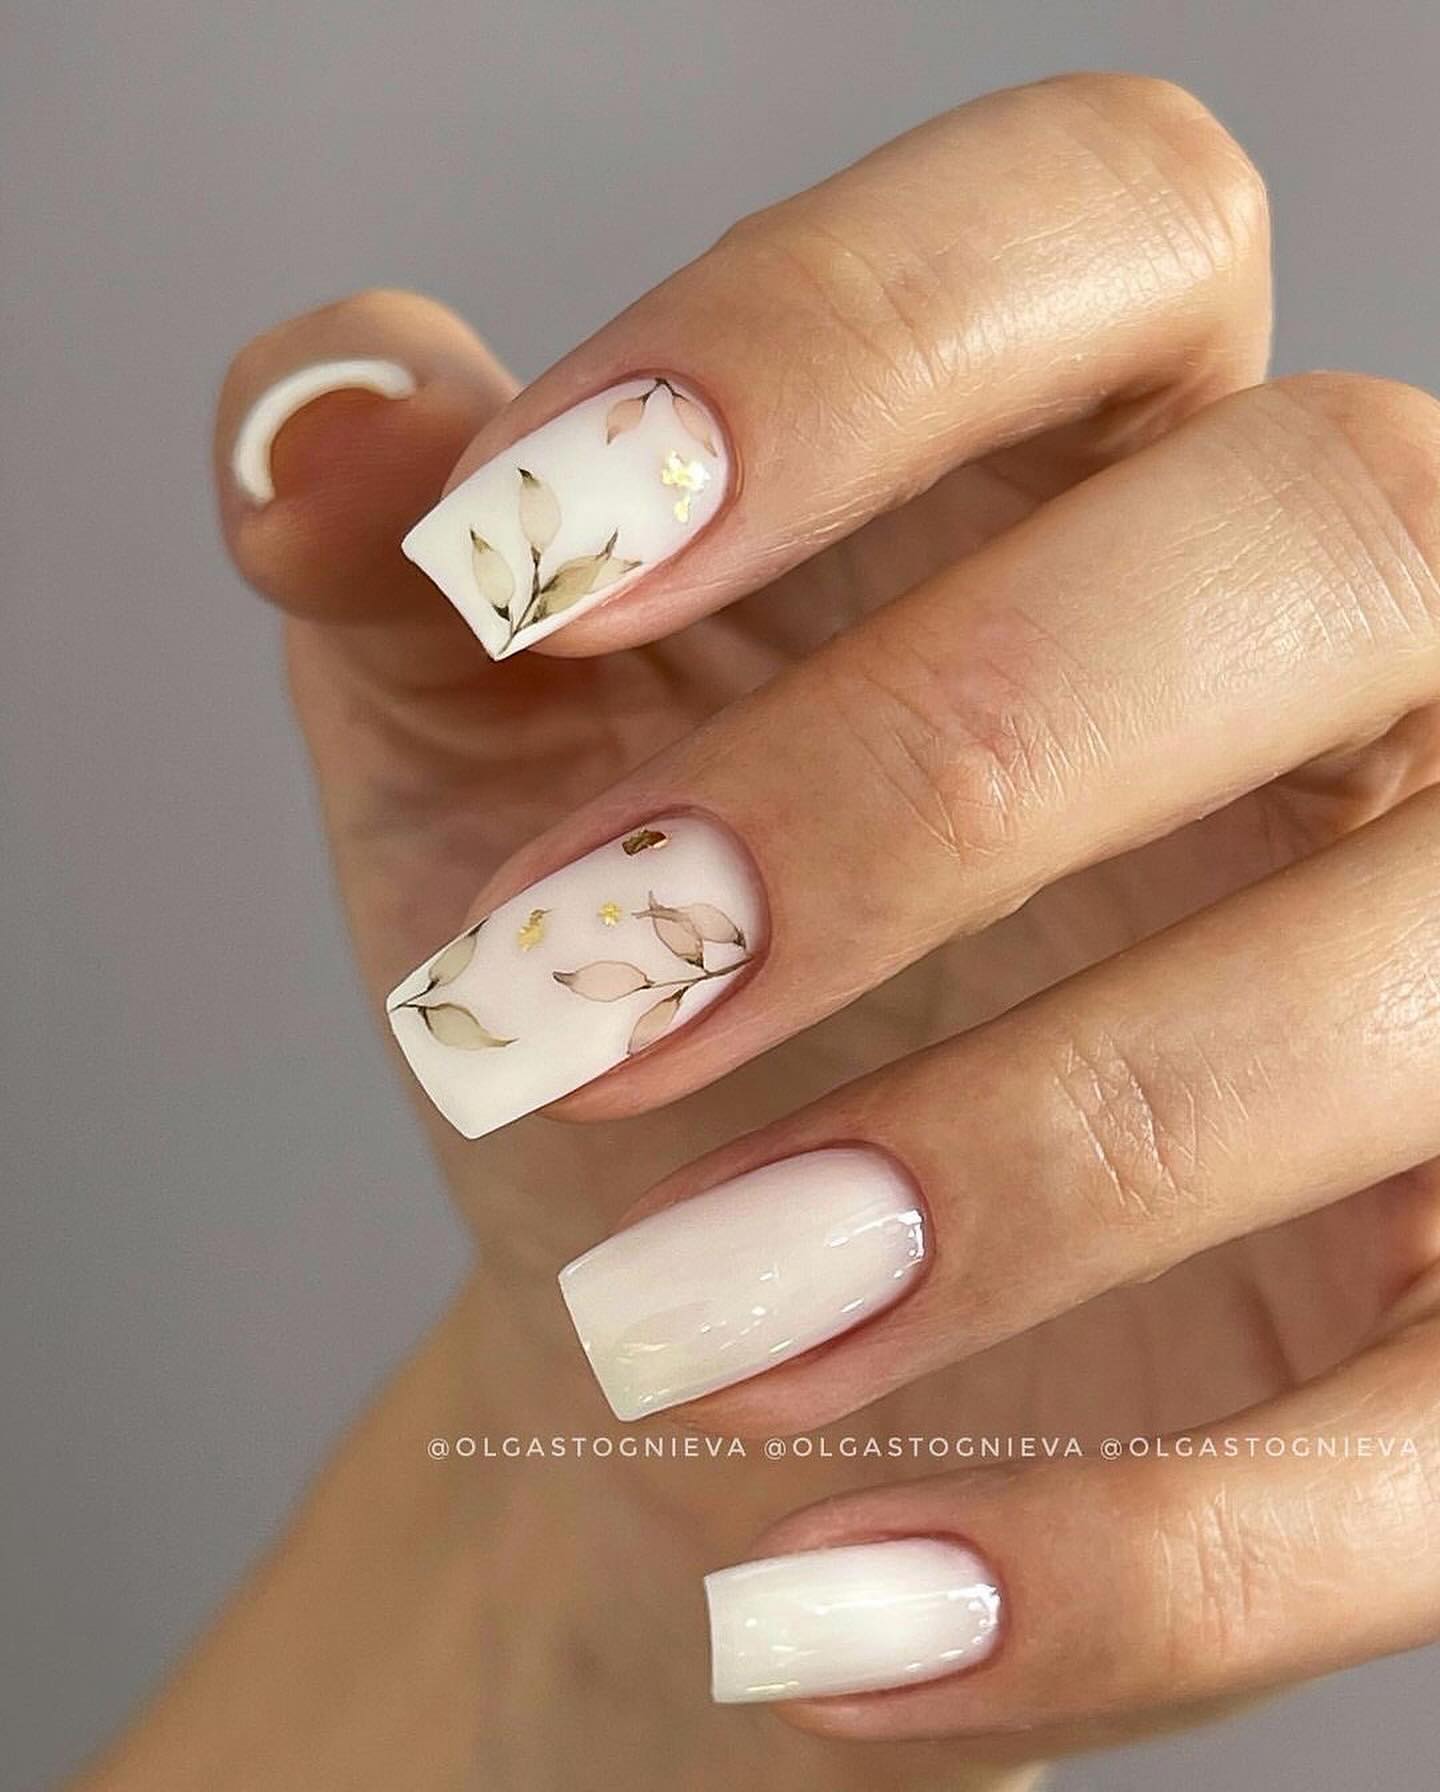 100+ Best Winter Nail Ideas And Designs To Try images 54